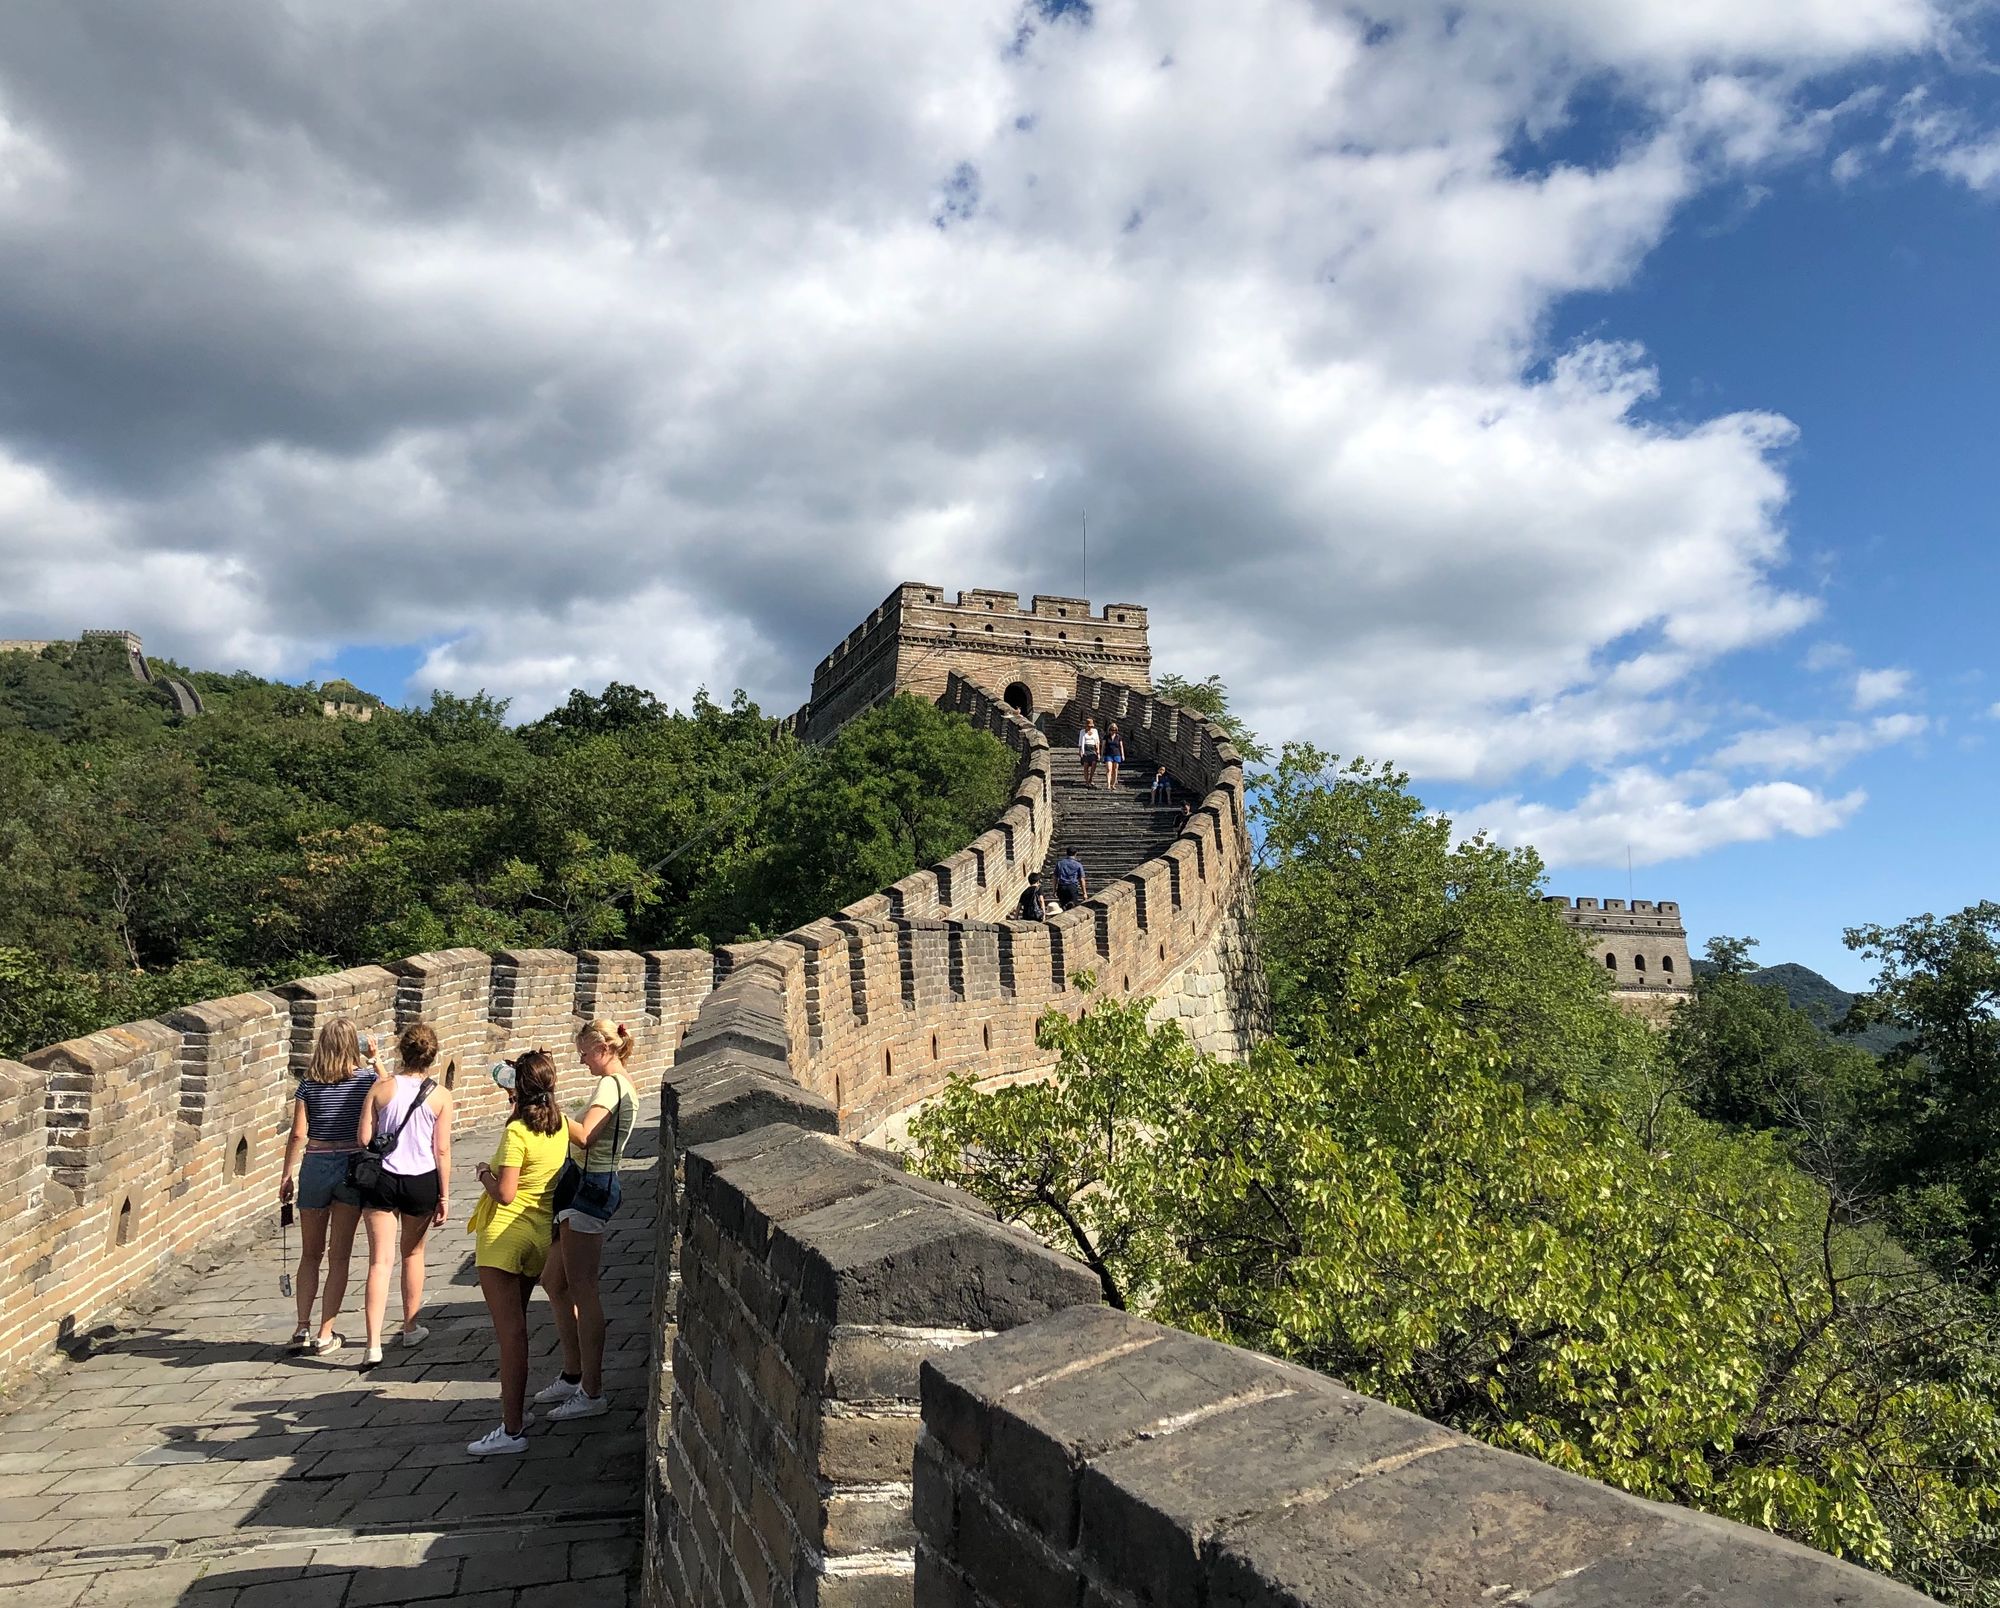 Day 2: The Great Wall of China